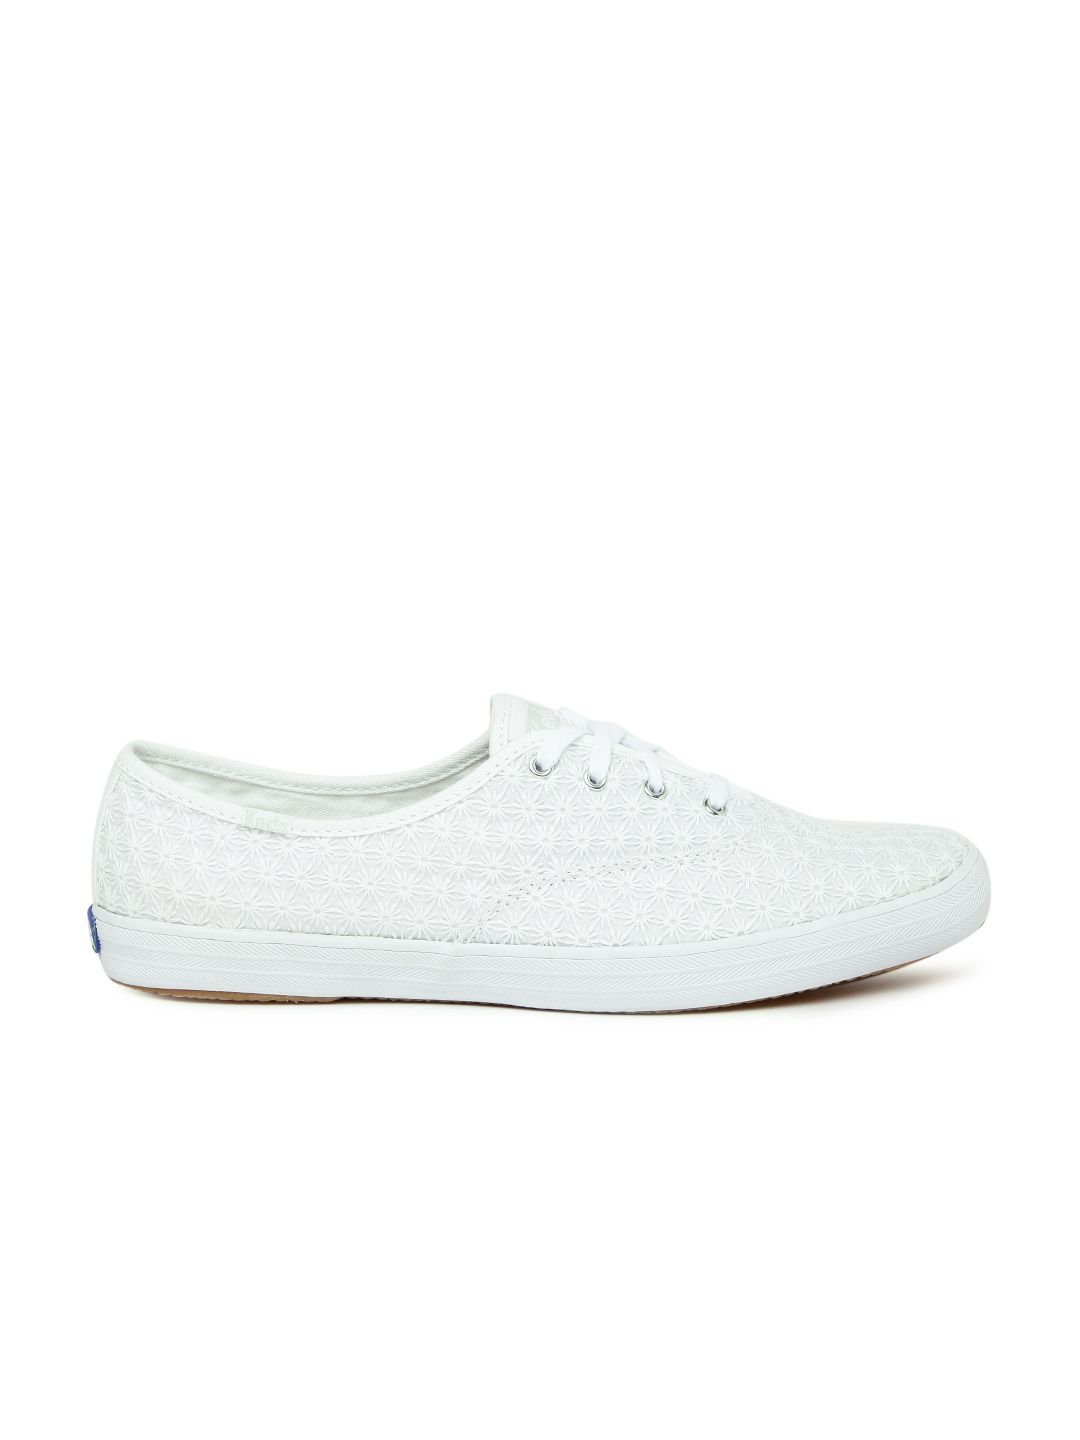 keds white shoes price